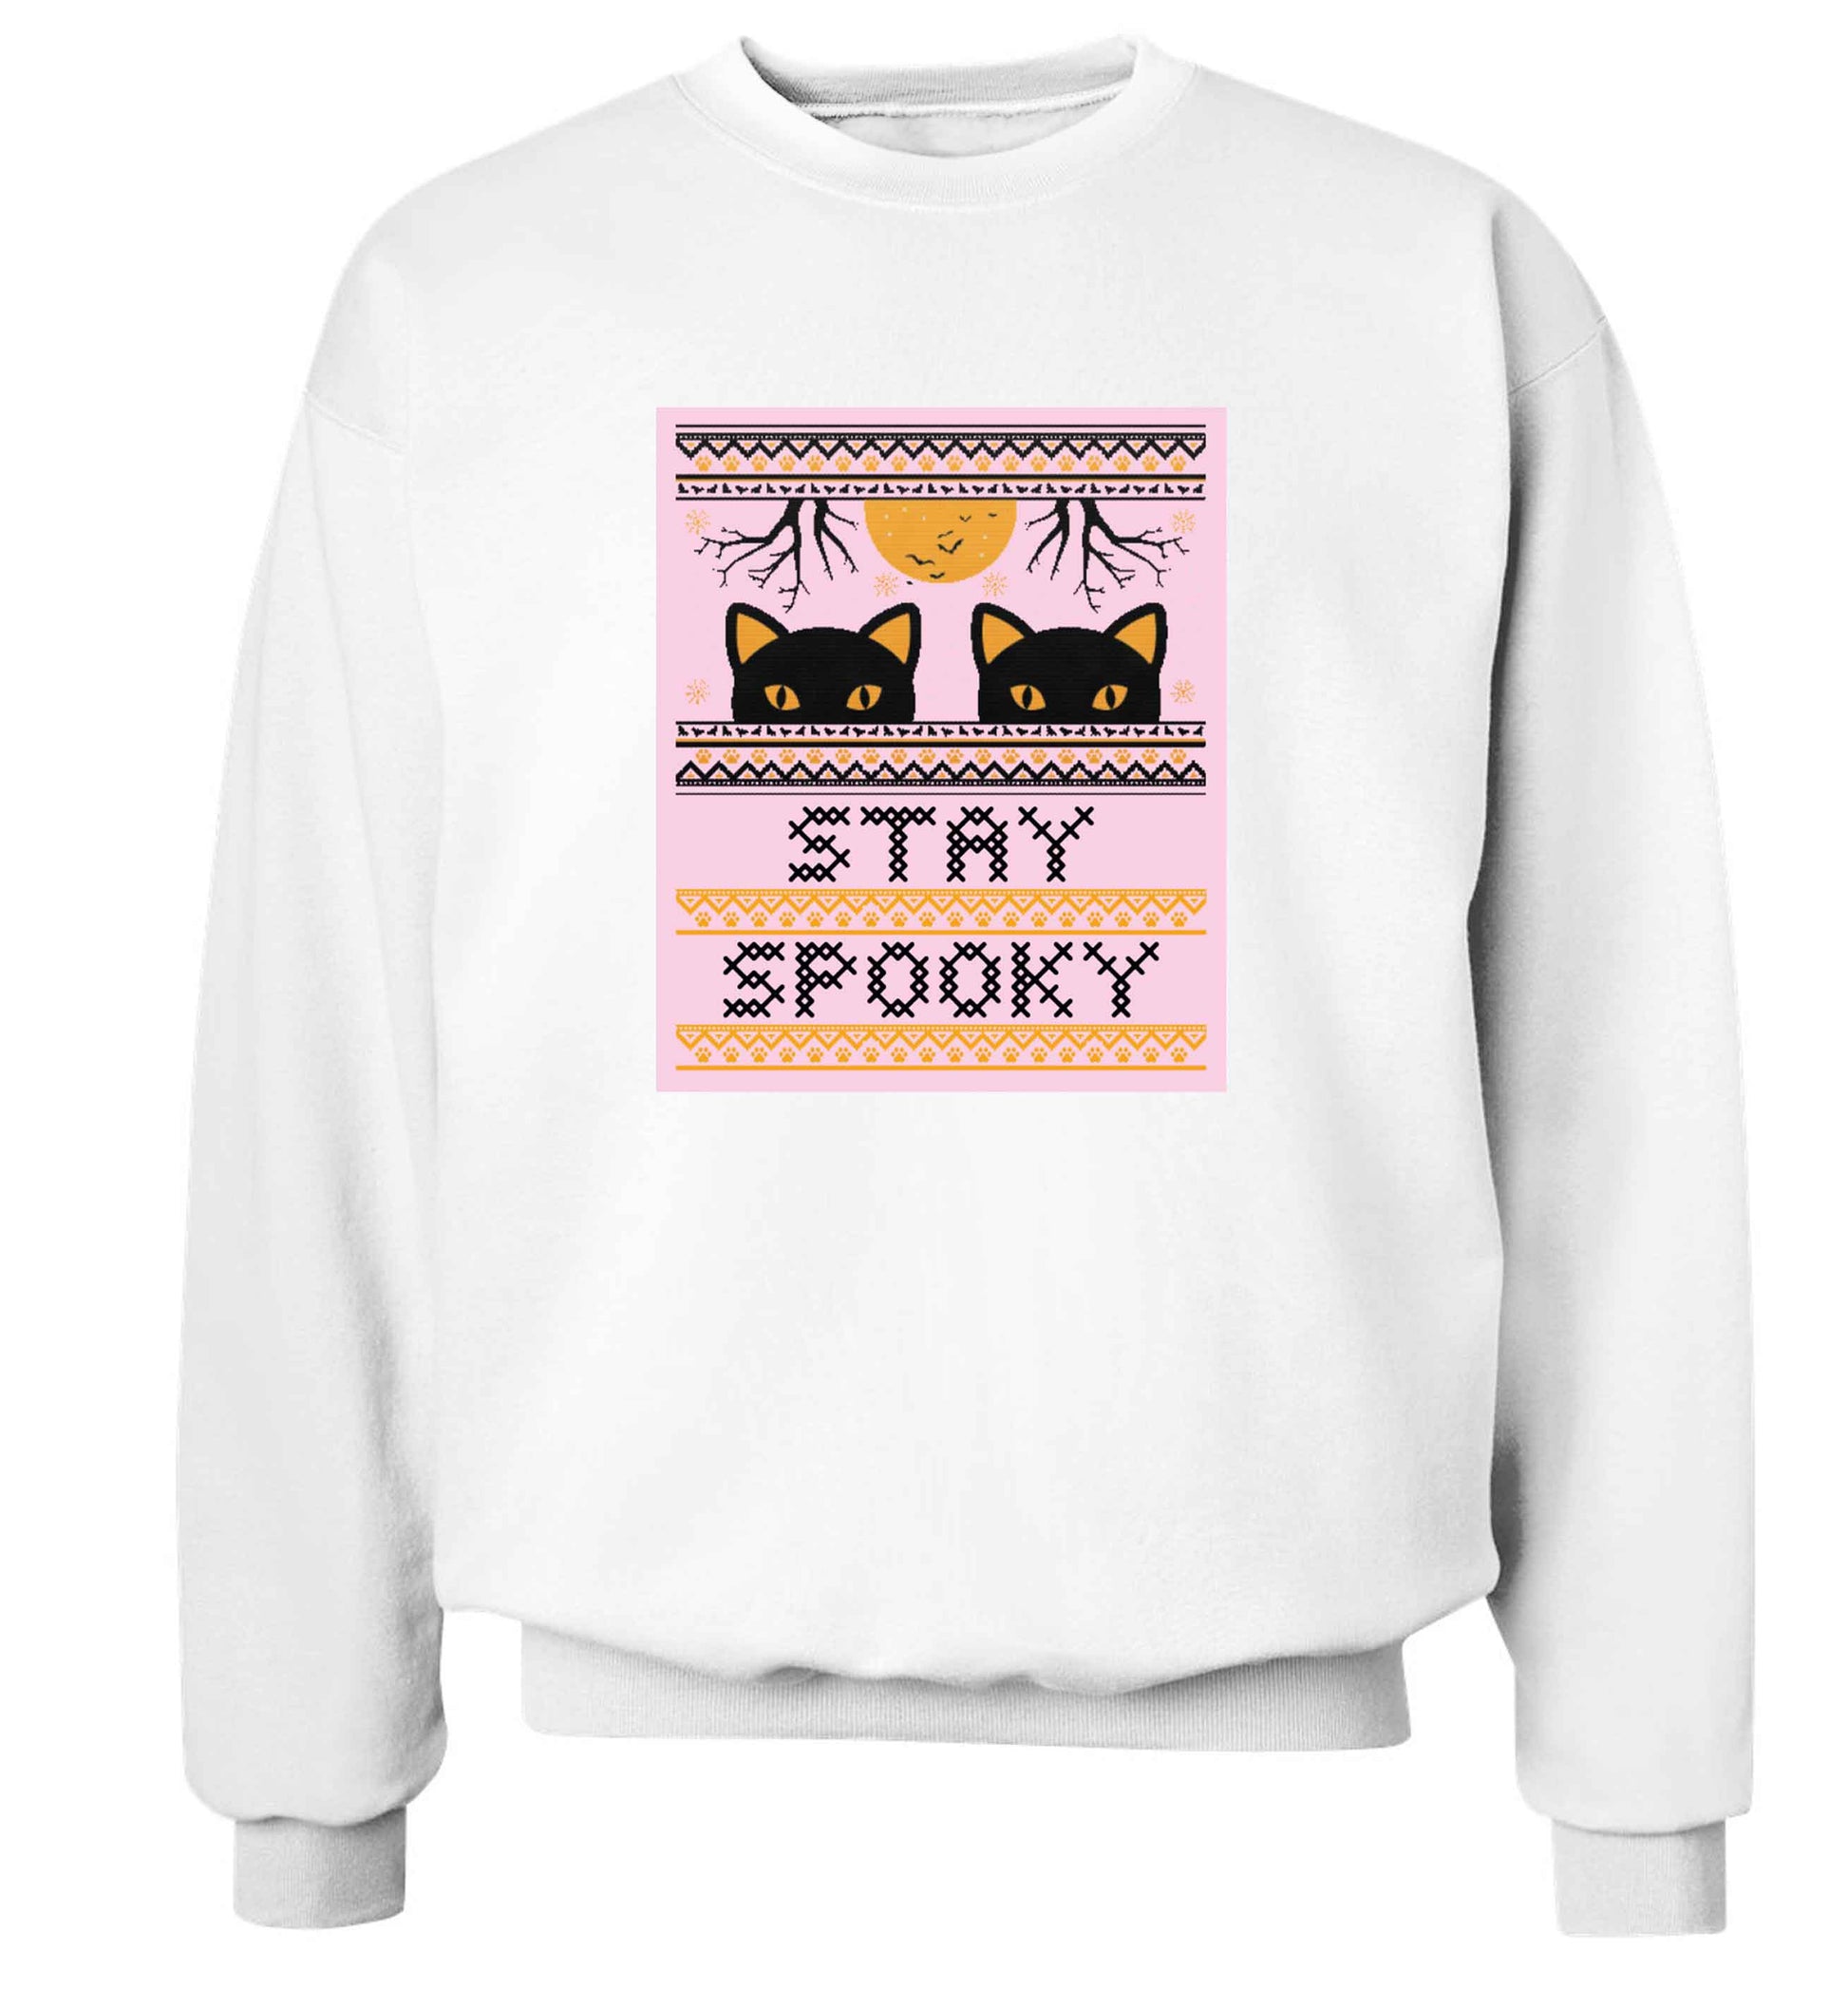 Stay spooky adult's unisex white sweater 2XL